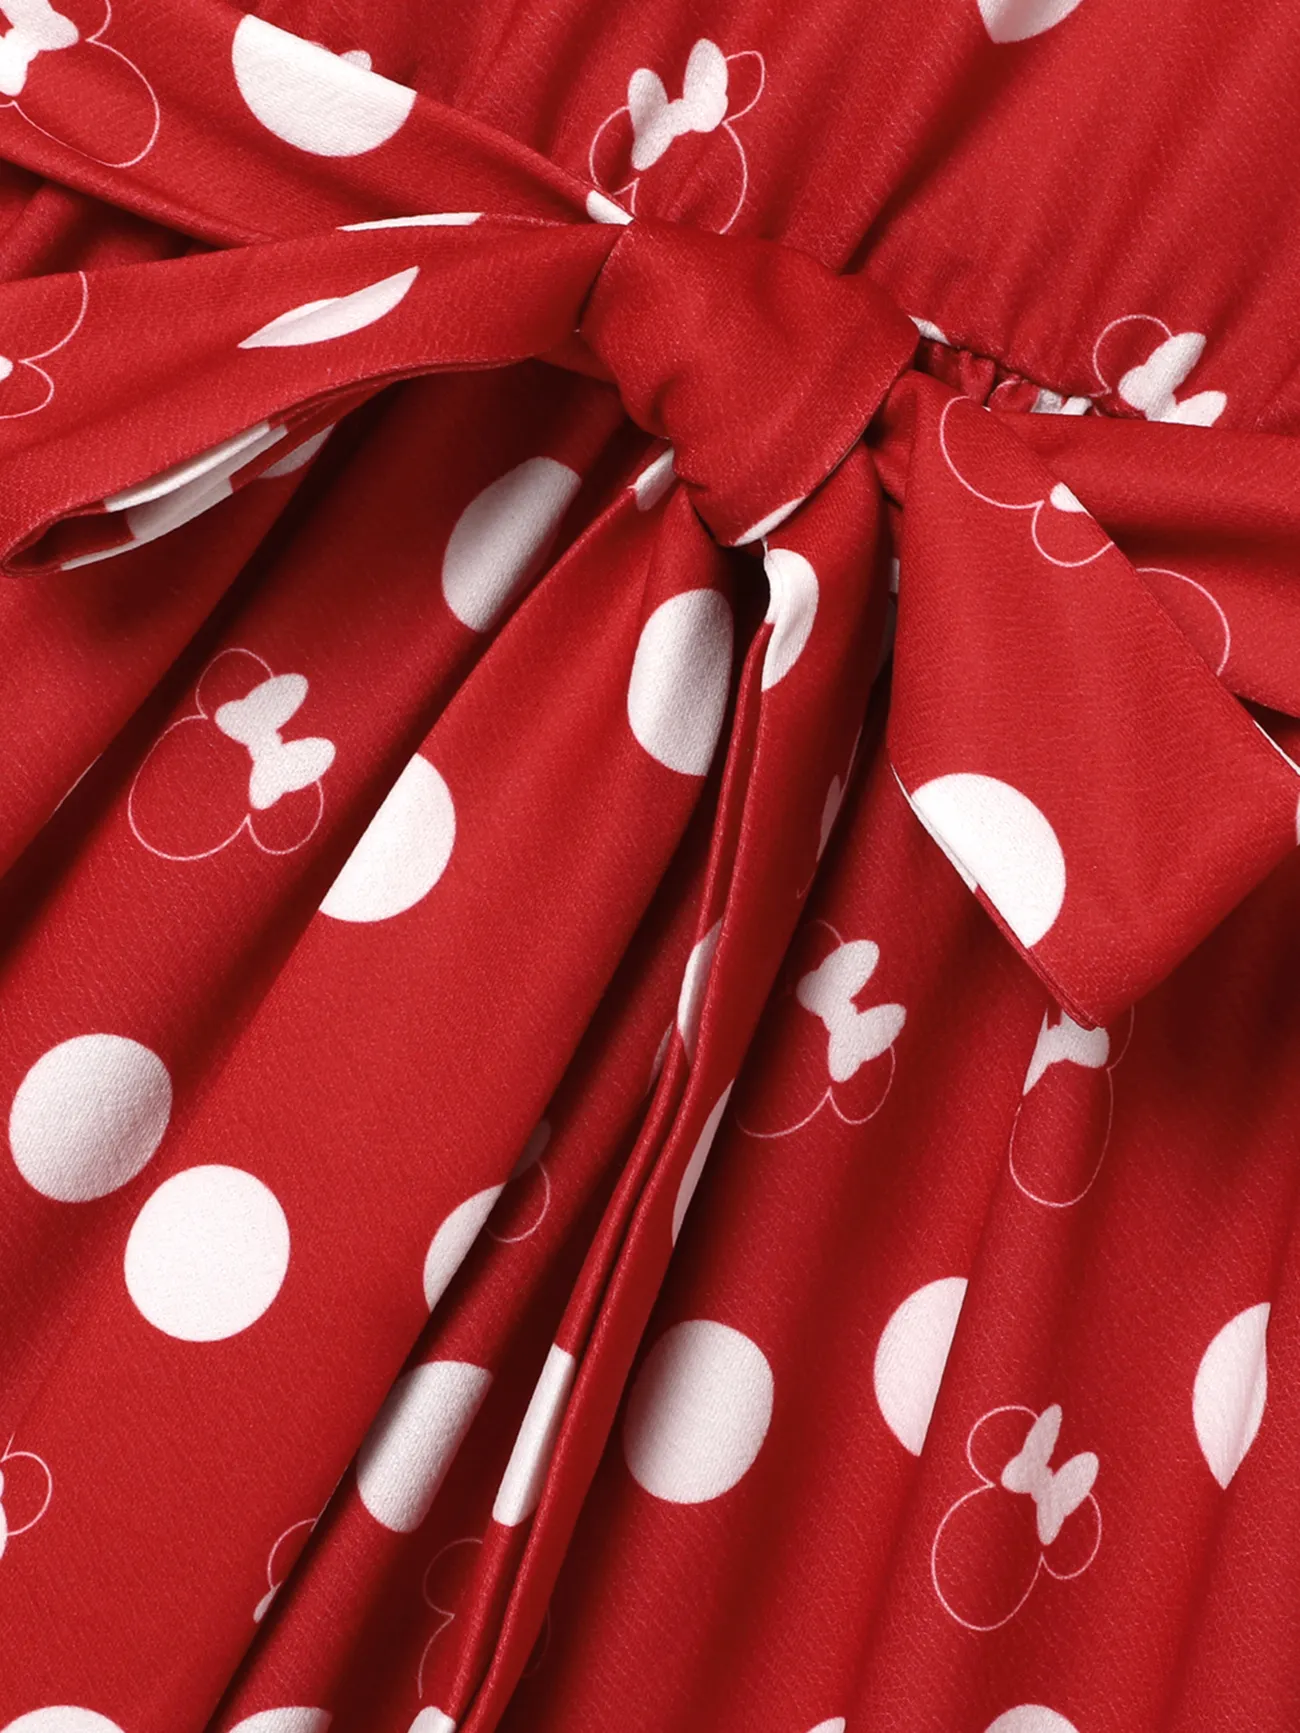 Disney Mickey and Friends Family Matching Character Print Polka Dots Long-sleeve Red Dress or Cotton Top Red big image 1